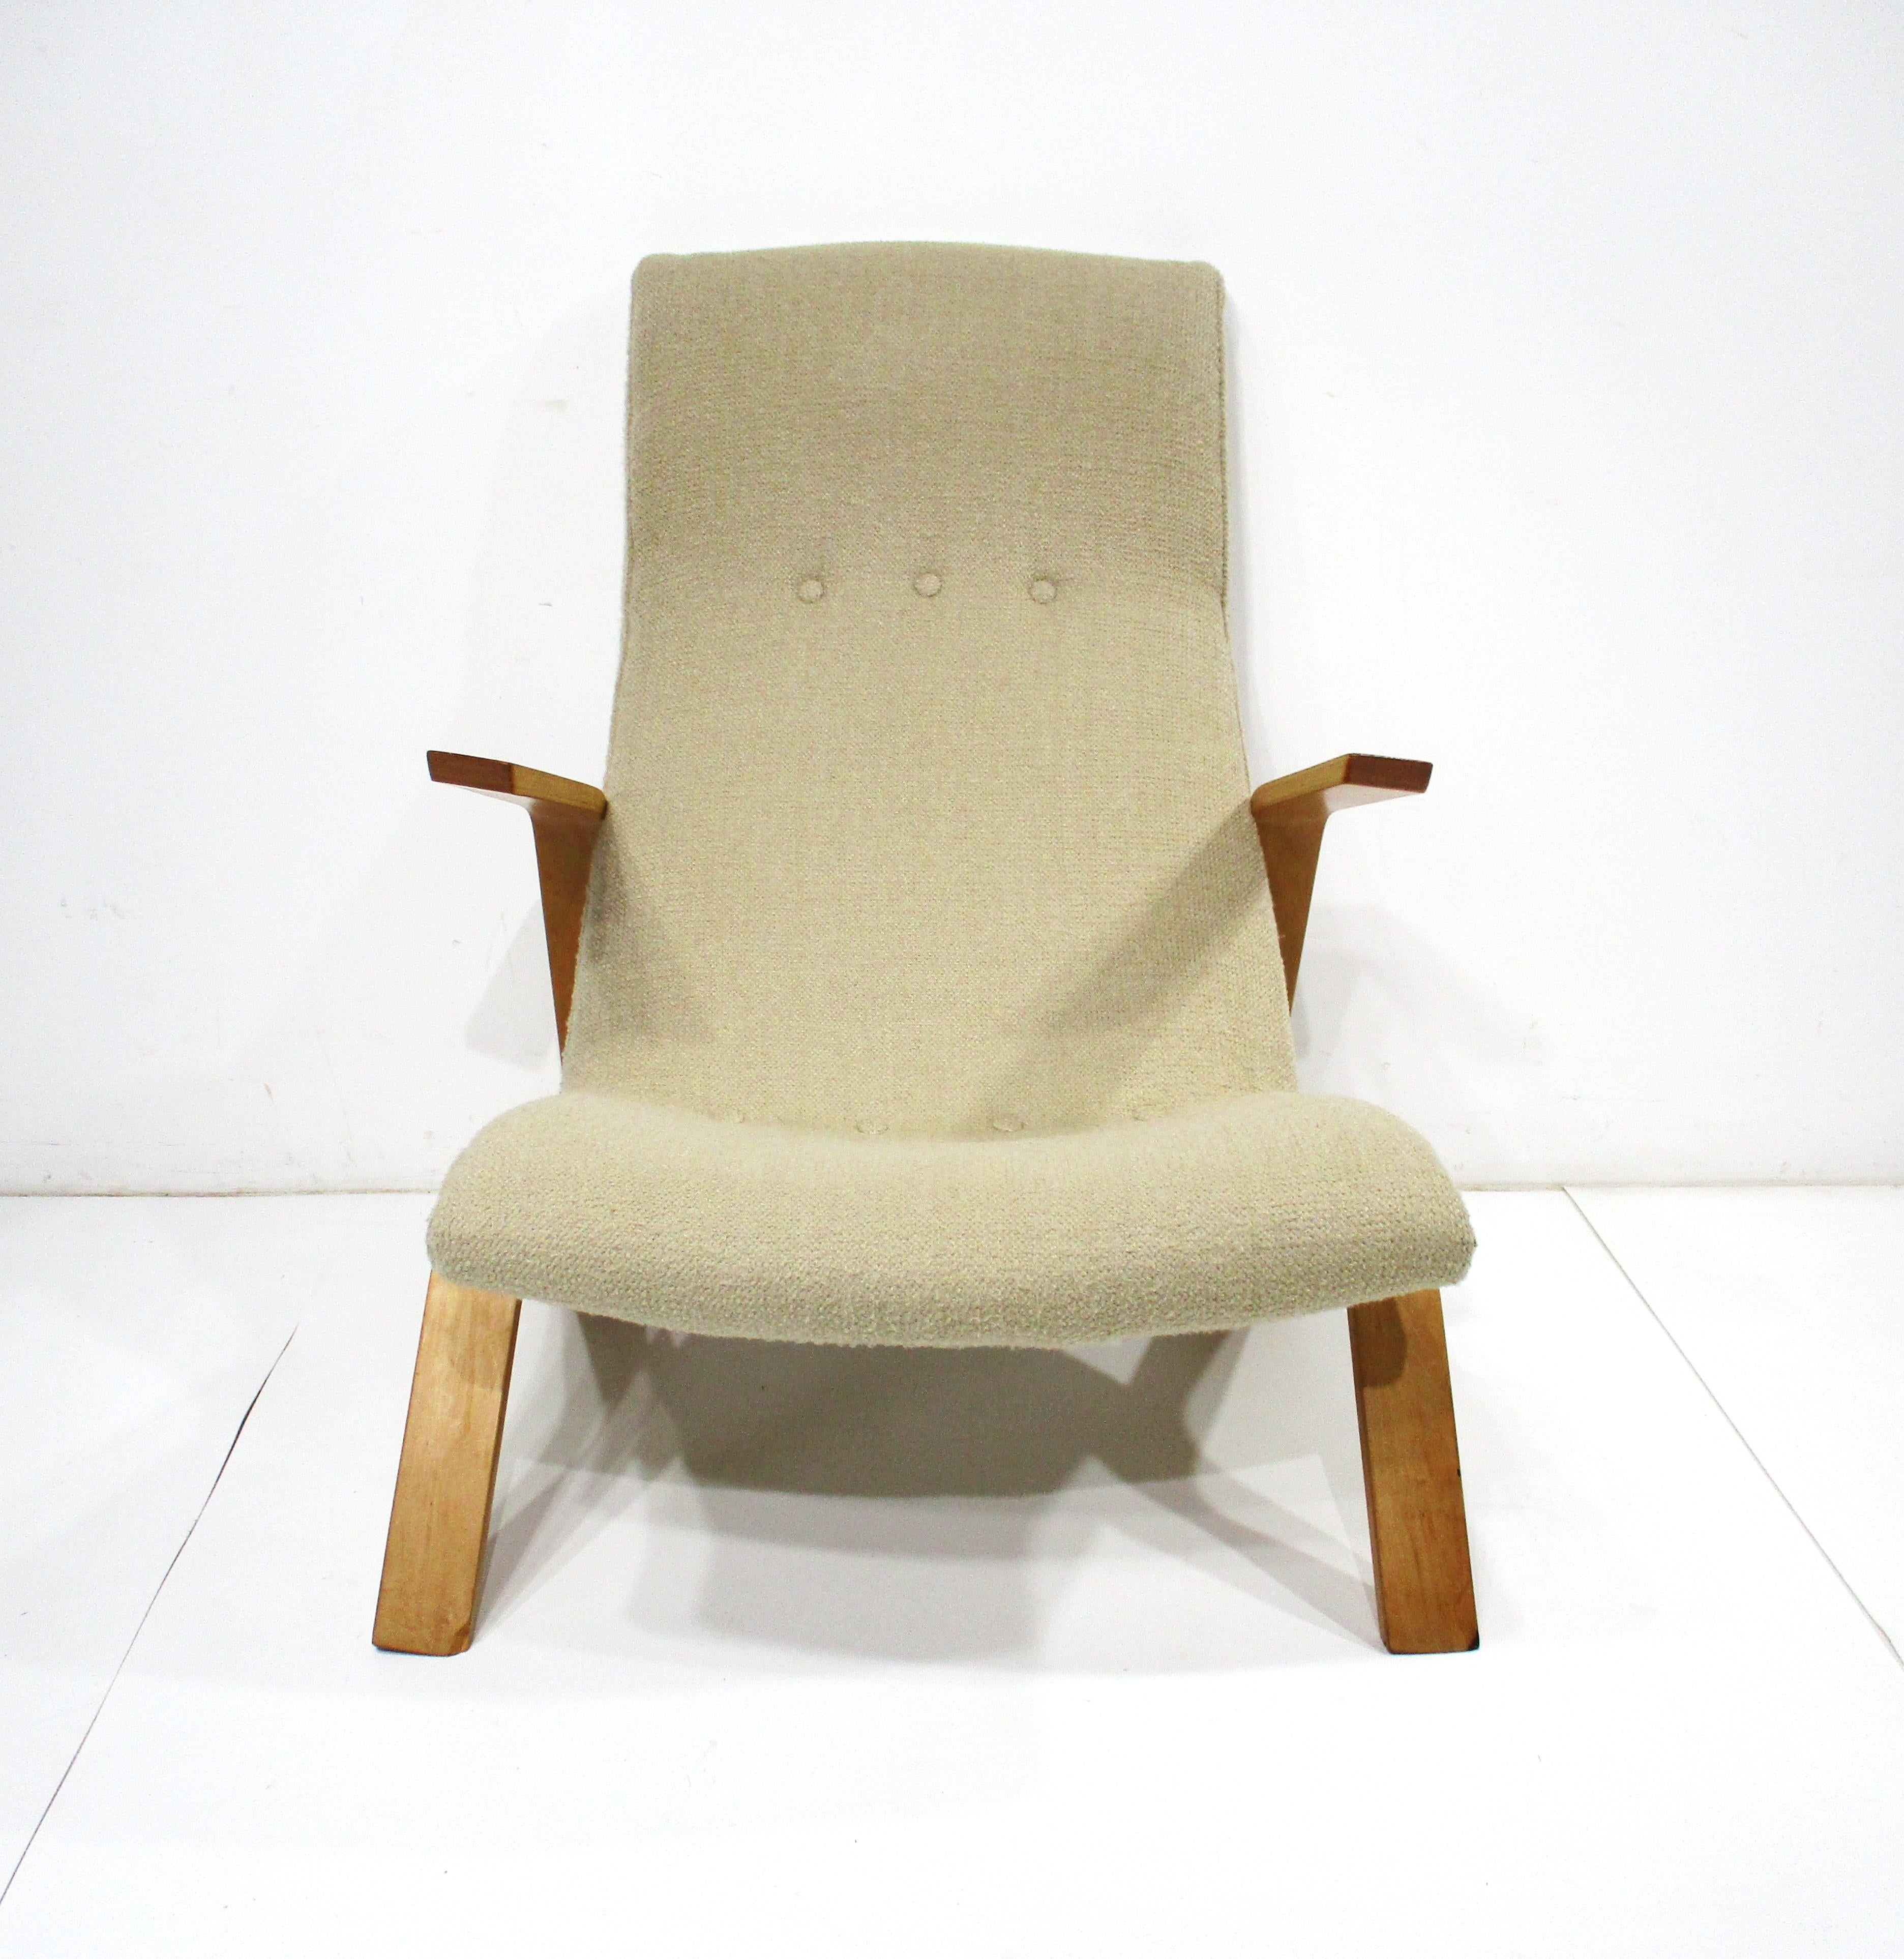 A early production Grasshopper lounge chair with nice sculptural arms and leg design . The upholstery is a mellow oatmeal color with the butter scotch birch arms making quite the statement . The chair is very comfortable with the slanted arms and